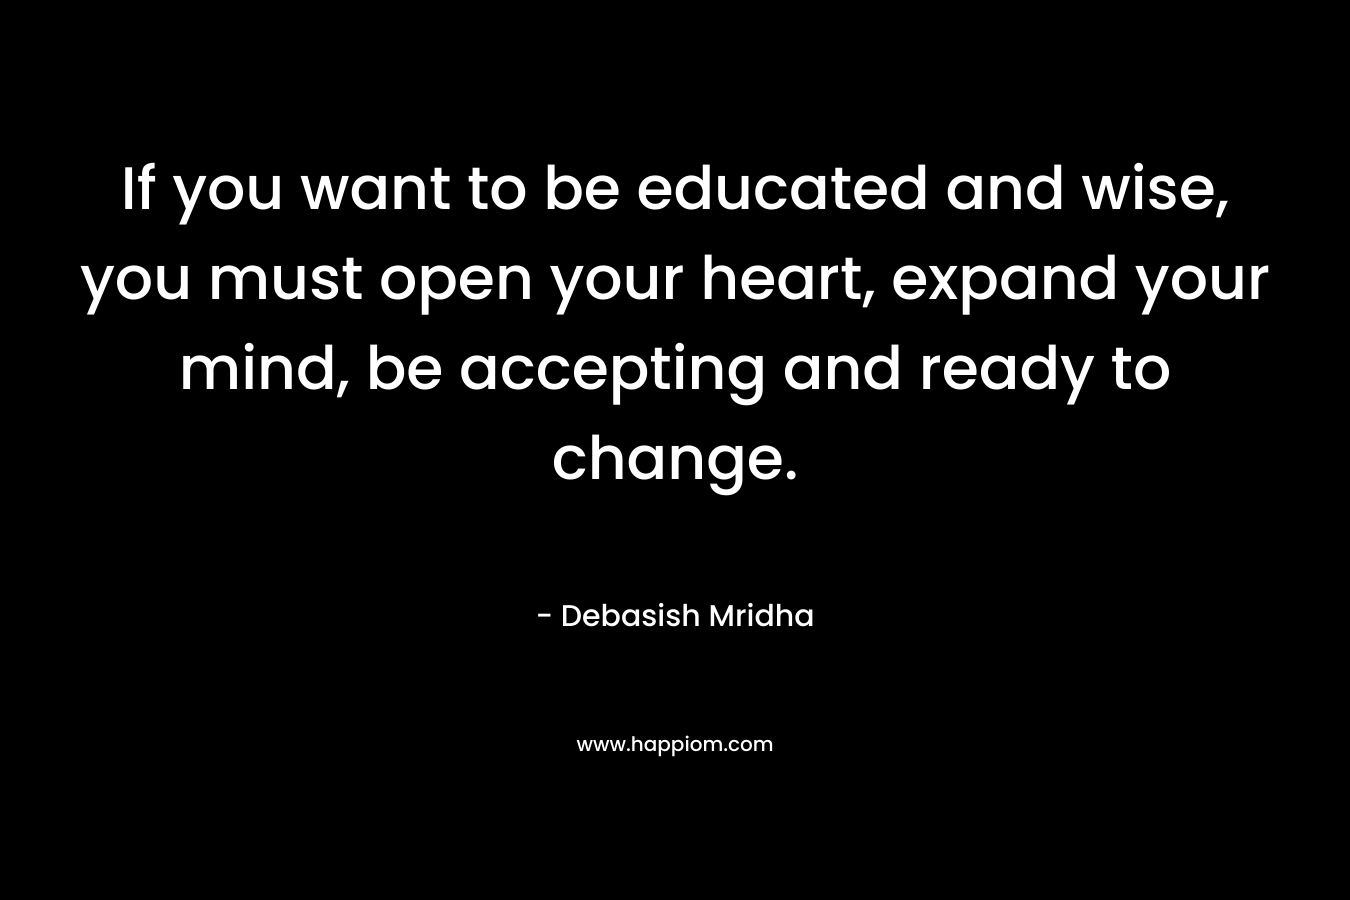 If you want to be educated and wise, you must open your heart, expand your mind, be accepting and ready to change. – Debasish Mridha